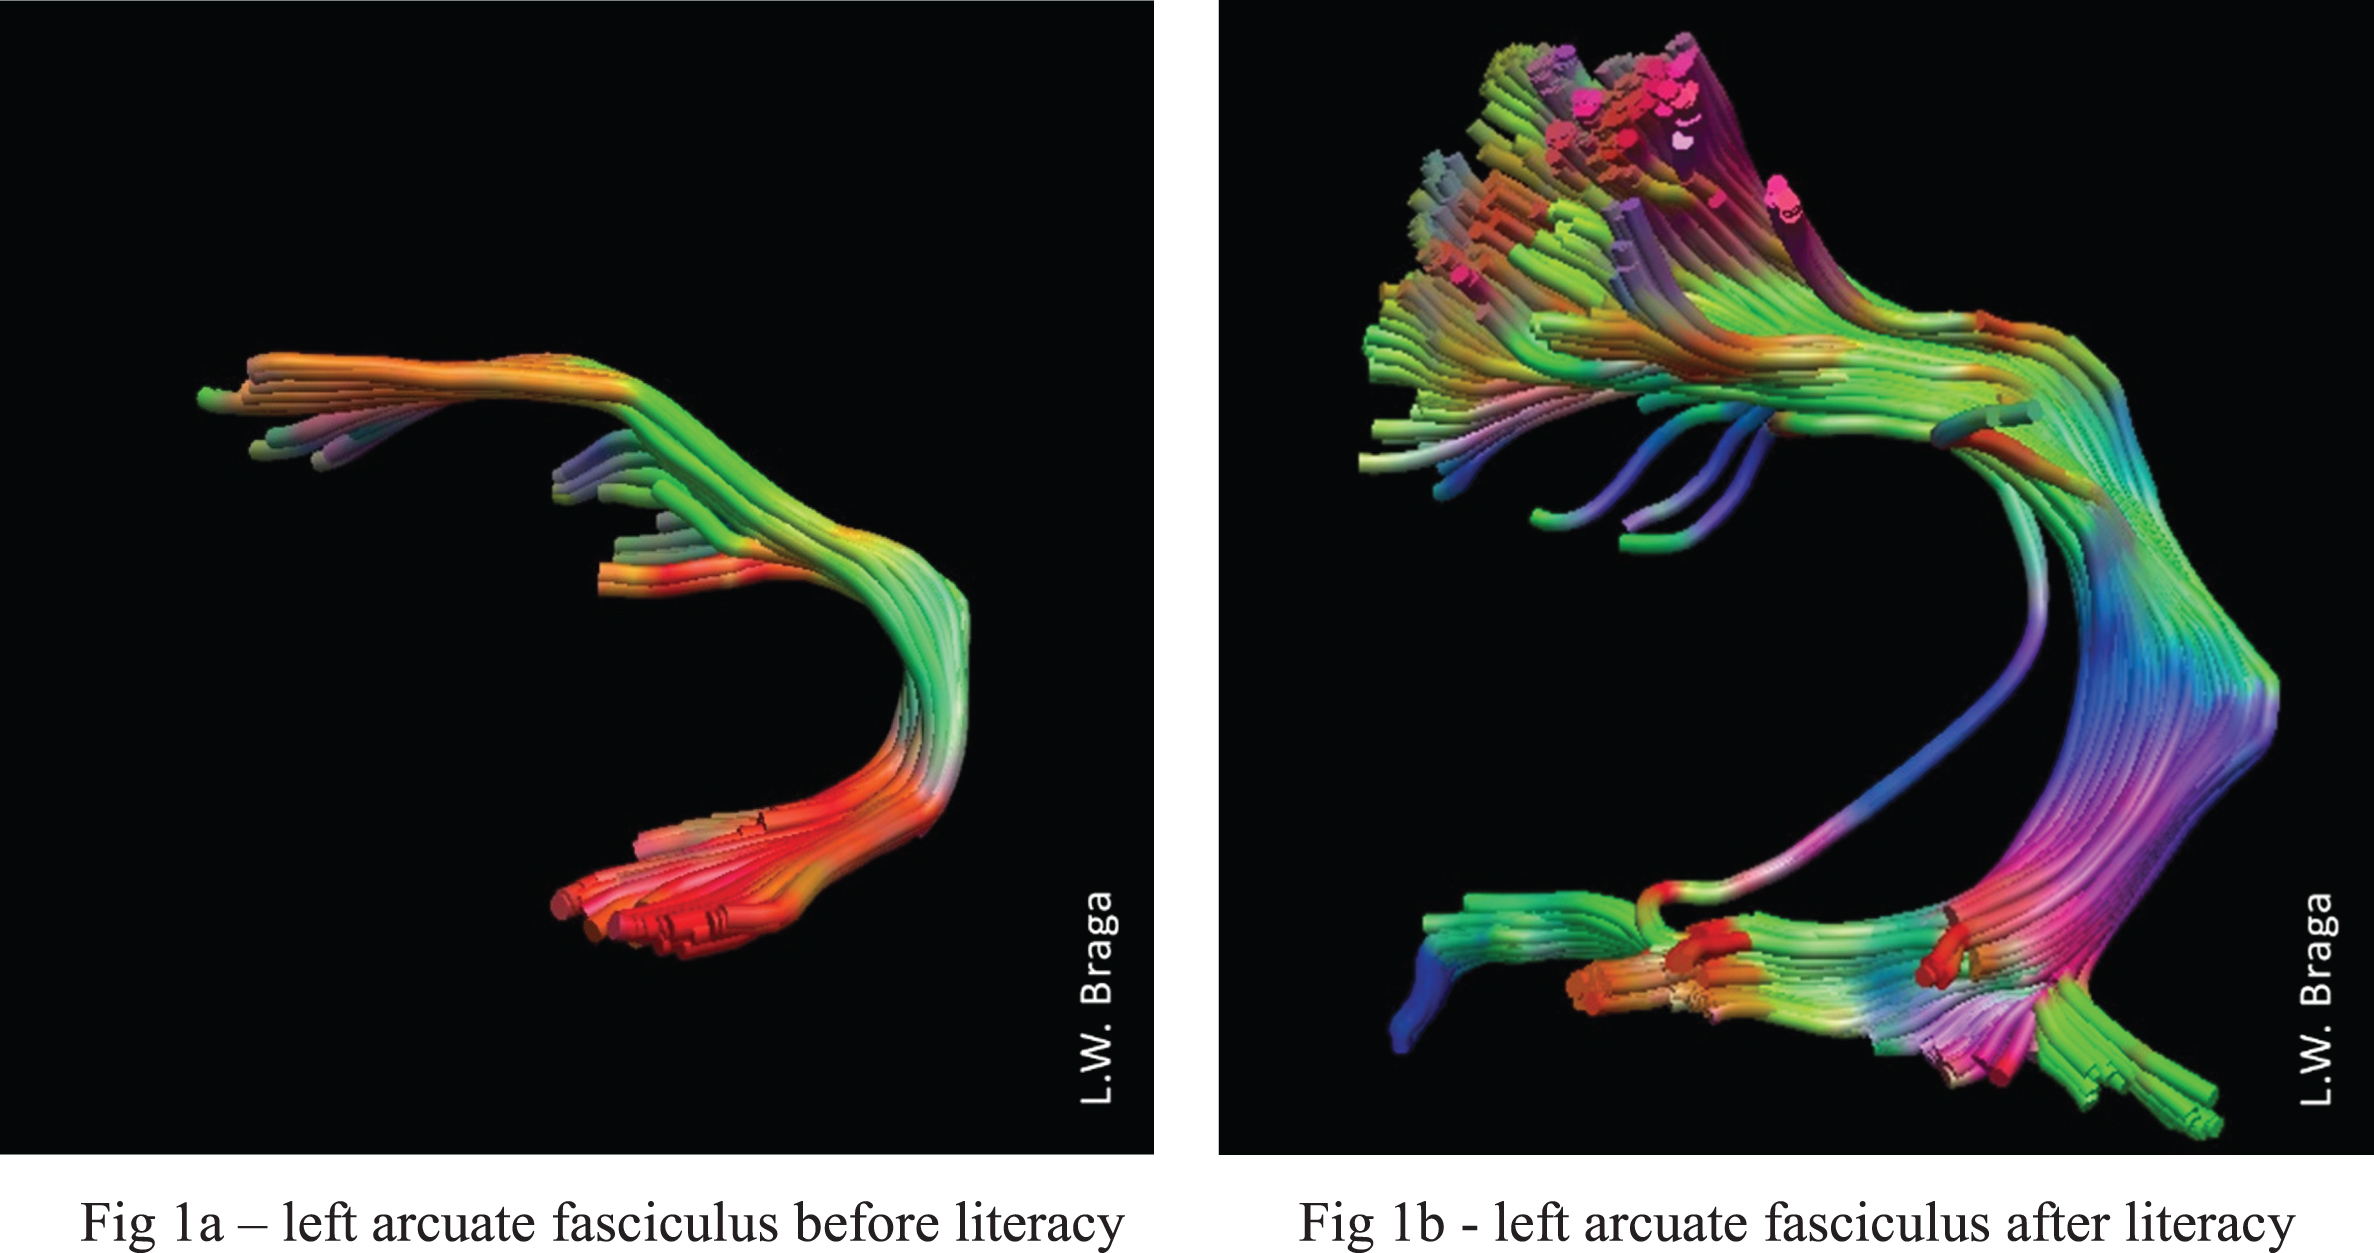 DTI images of the participant’s left arcuate fasciculus (a) before and b) after intervention. There was a significant increase in number of fibers, volume, and length of the left arcuate fasciculus after literacy acquisition.